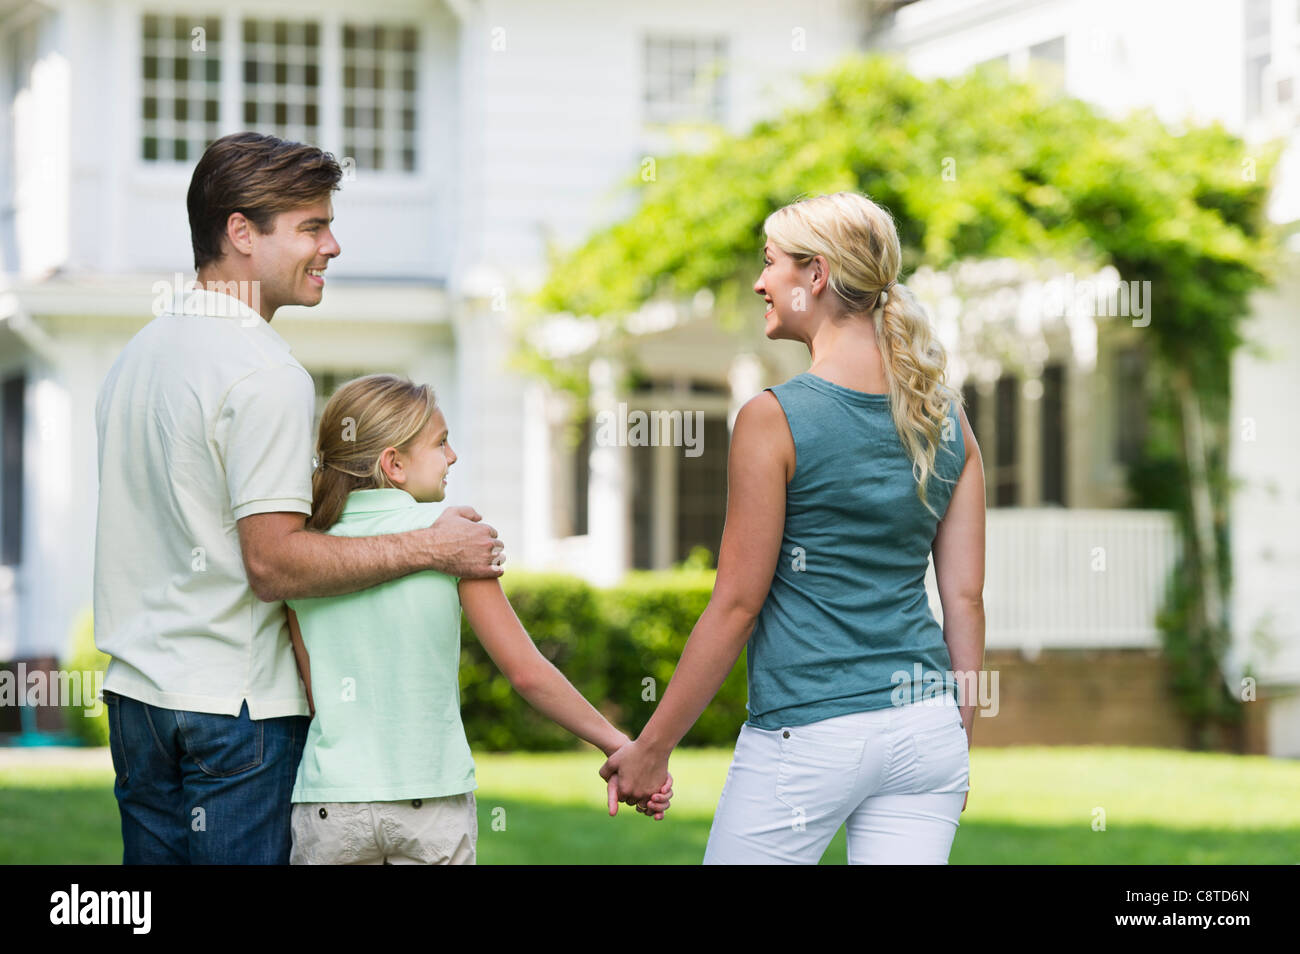 USA, New York State, Old Westbury, Parents with daughter in front of house Stock Photo